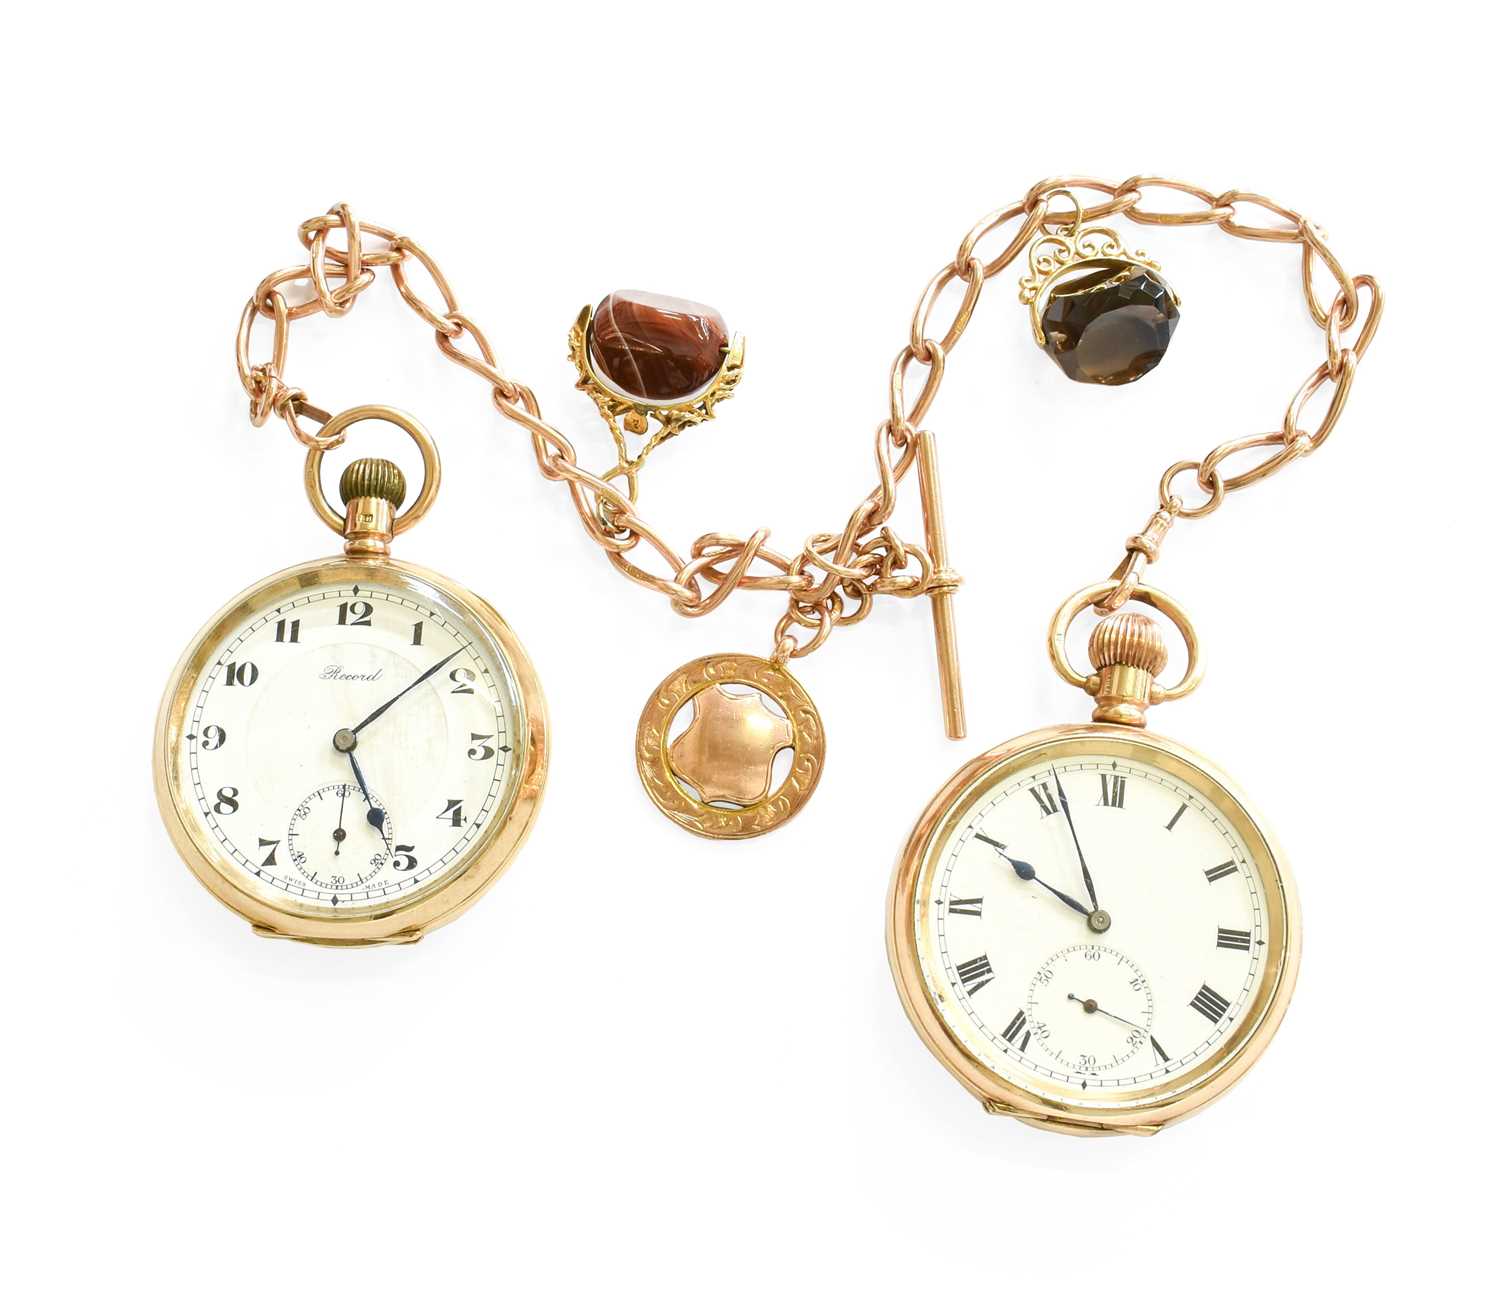 A 9 Carat Gold Record Pocket Watch, a 9 Carat Gold Curb Link Watch Chain, with two attached 9